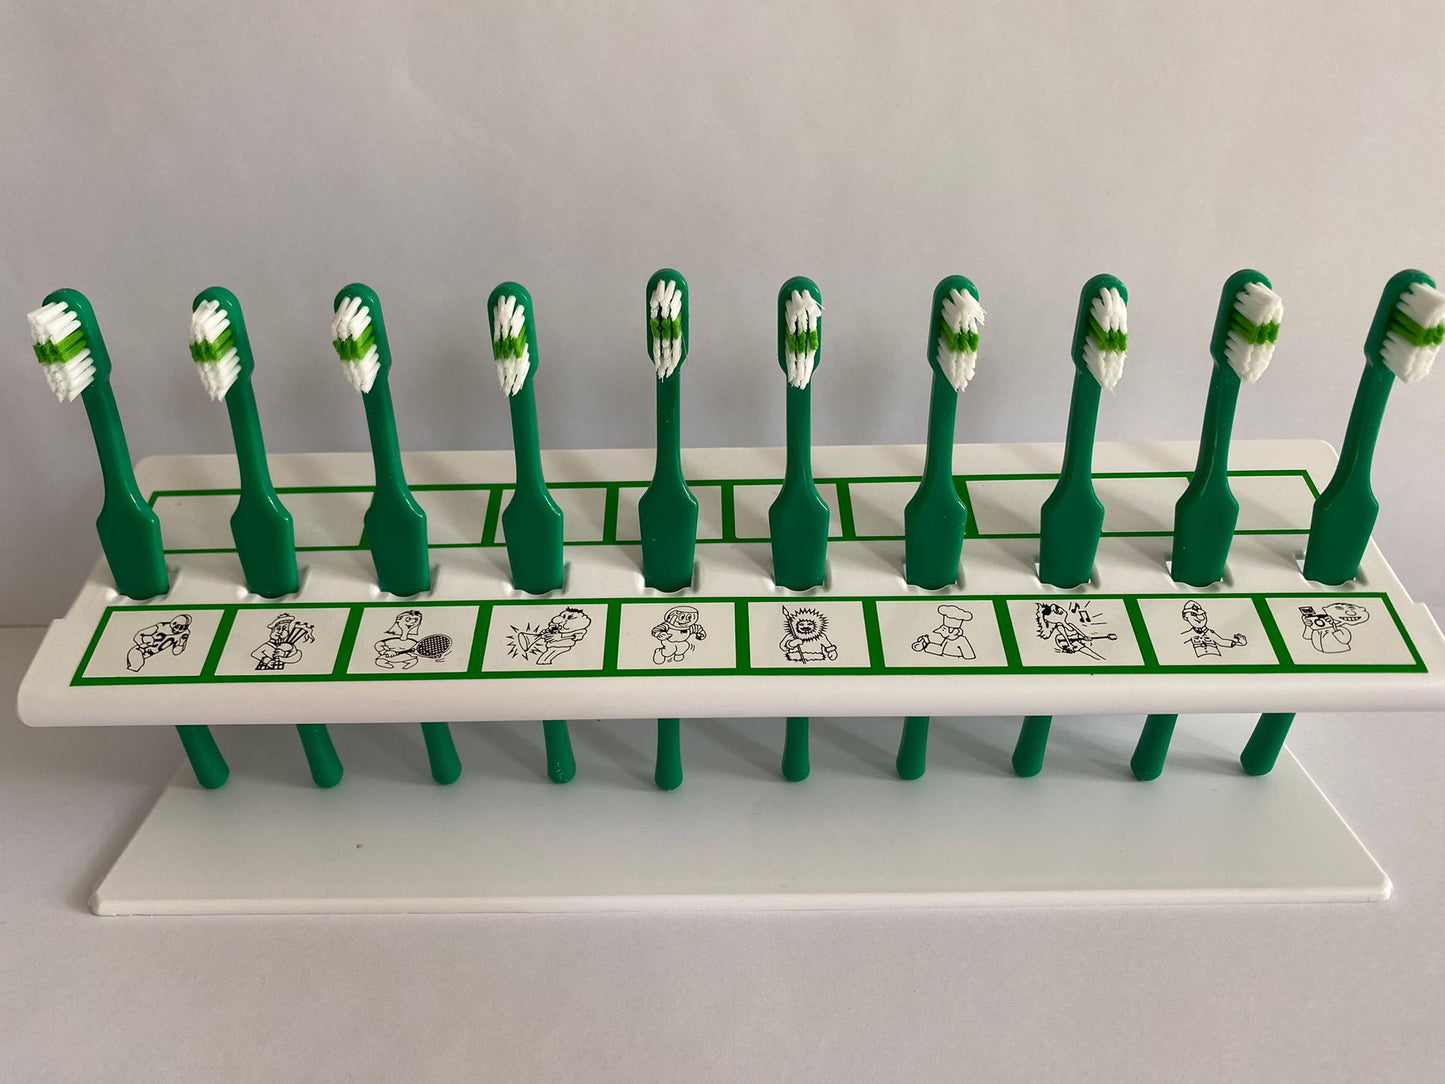 Toothbrush Rack with People symbols